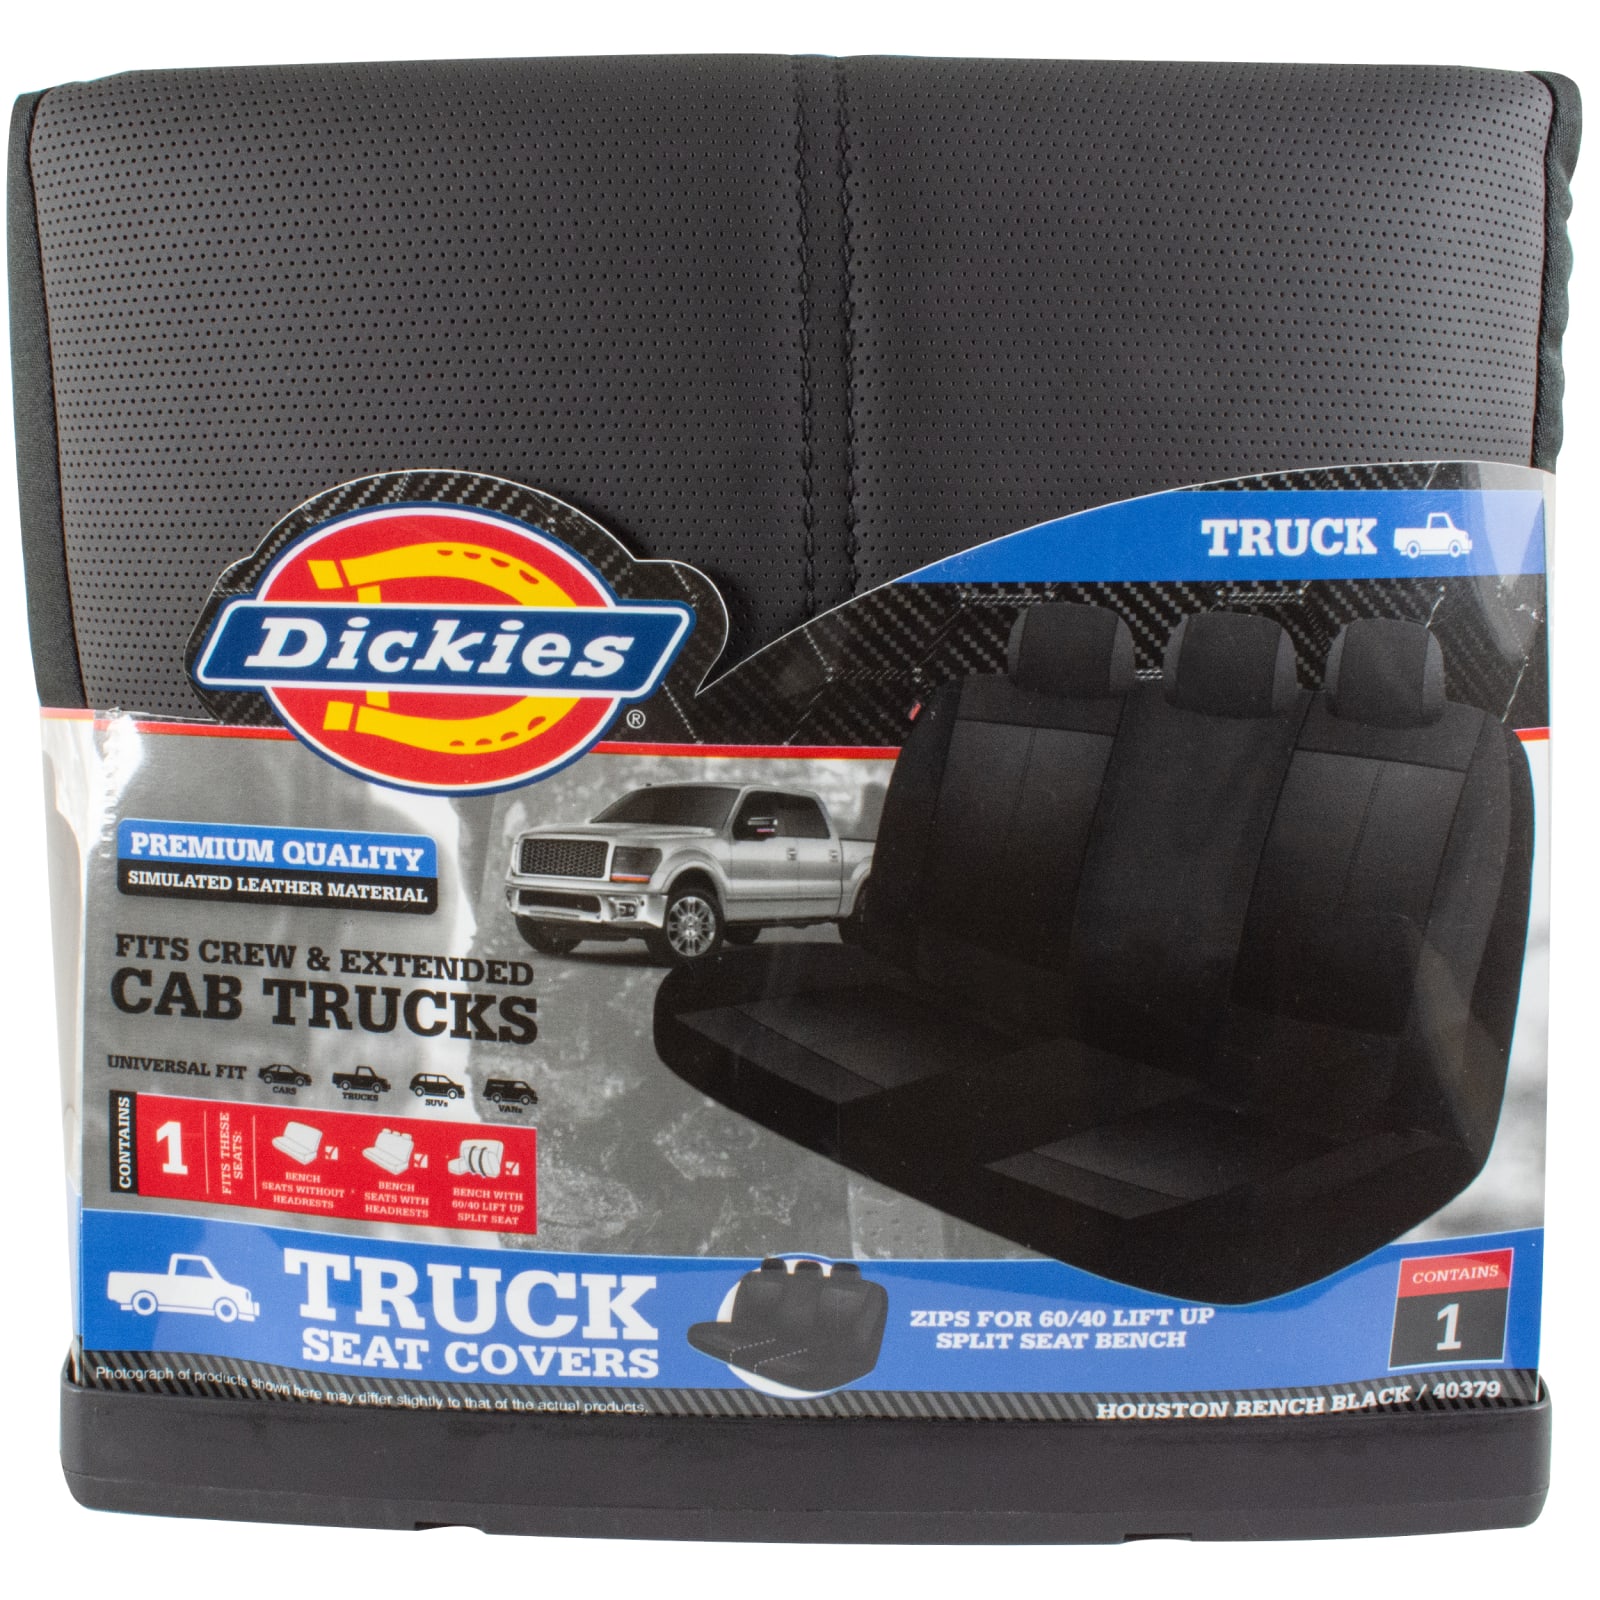 Houston 1 pc Black Truck Bench Seat Cover by Dickies at Fleet Farm